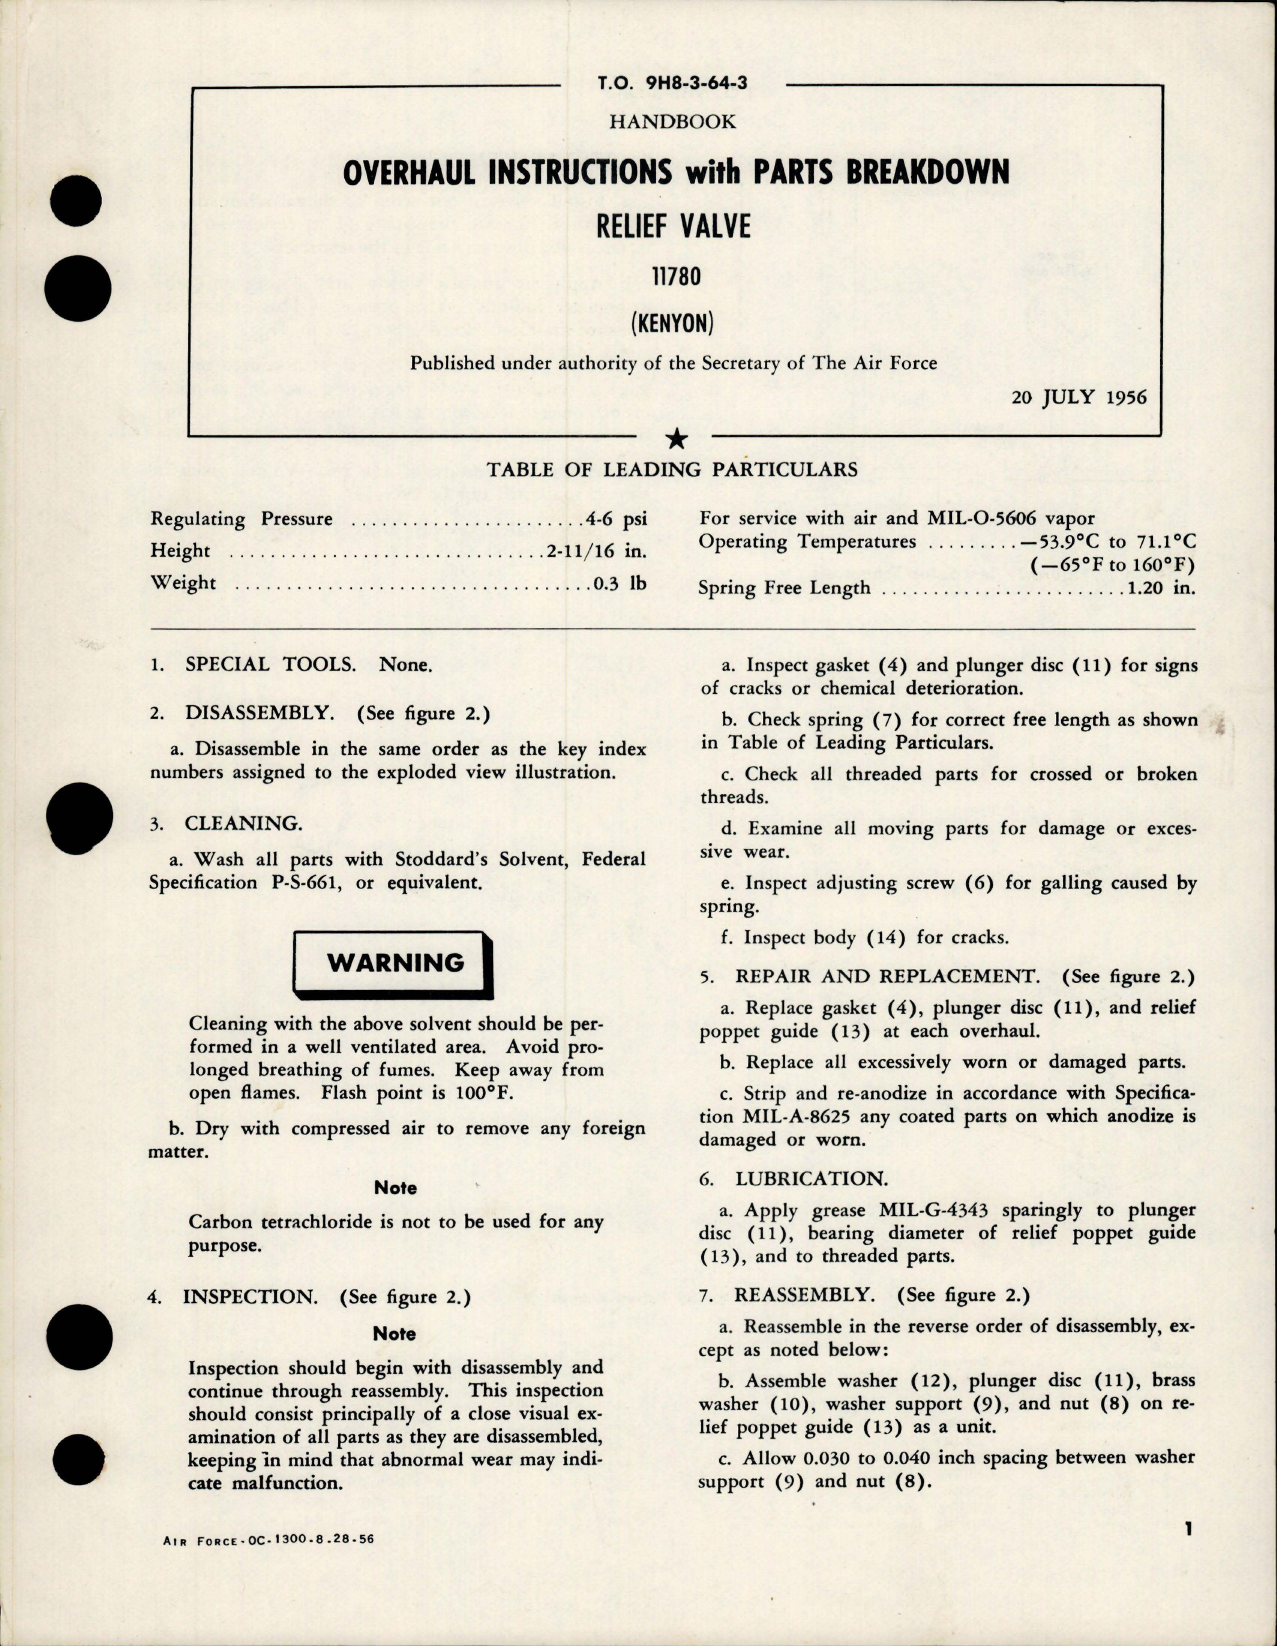 Sample page 1 from AirCorps Library document: Overhaul Instructions with Parts Breakdown for Relief Valve - 11780 